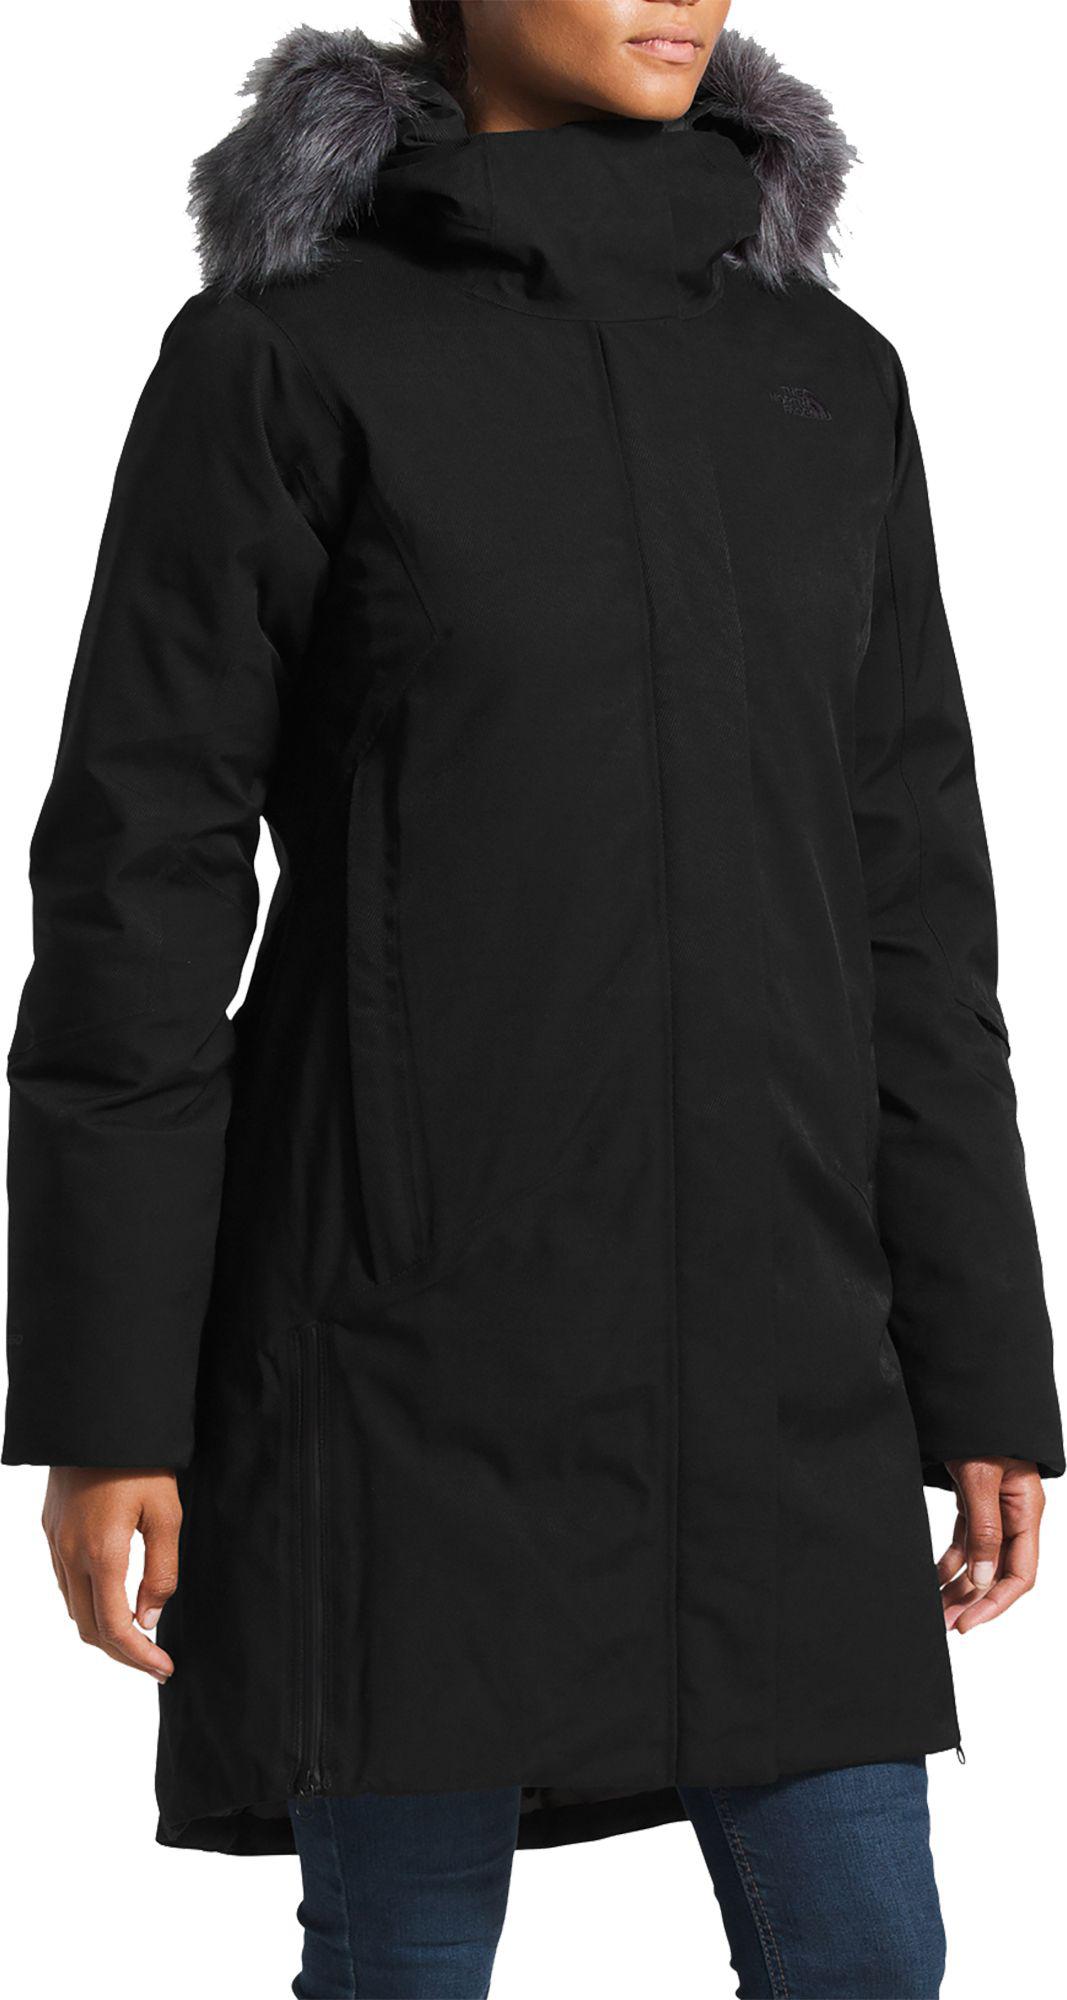 The North Face Defdown Parka Gtx in Black - Save 30% - Lyst